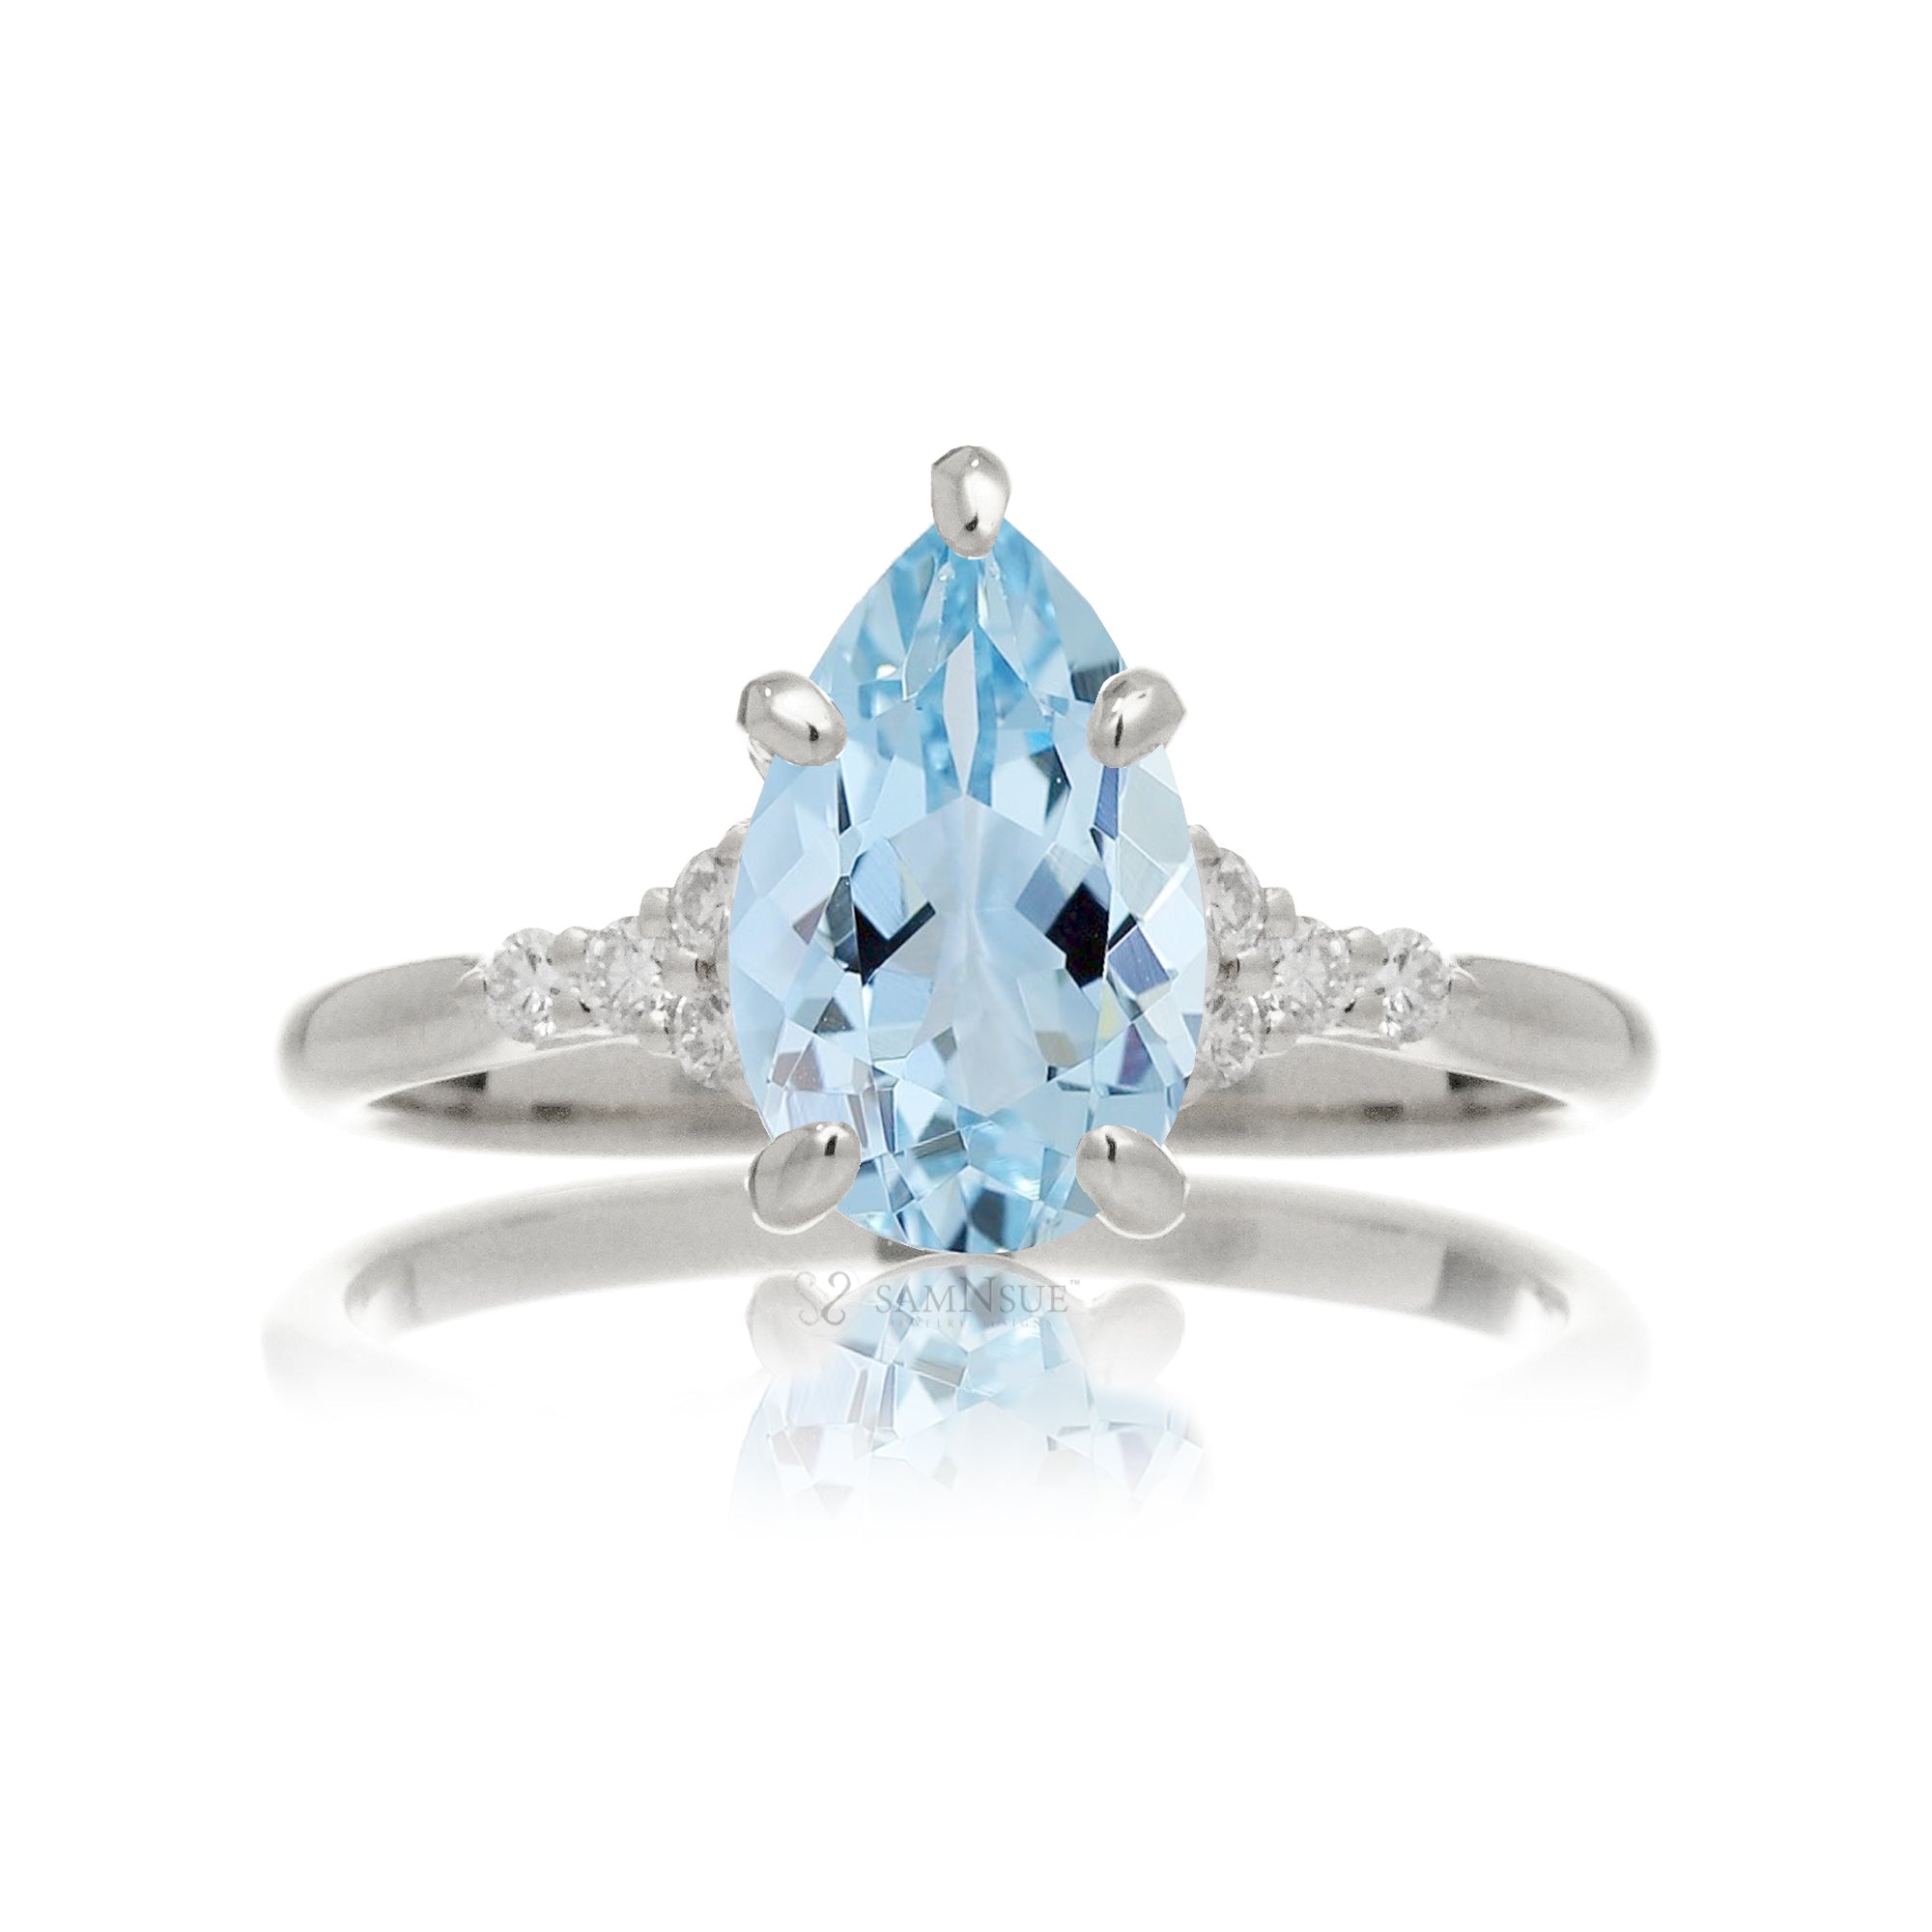 Pear cut natural aquamarine and diamond engagement ring in white gold - the Chloe